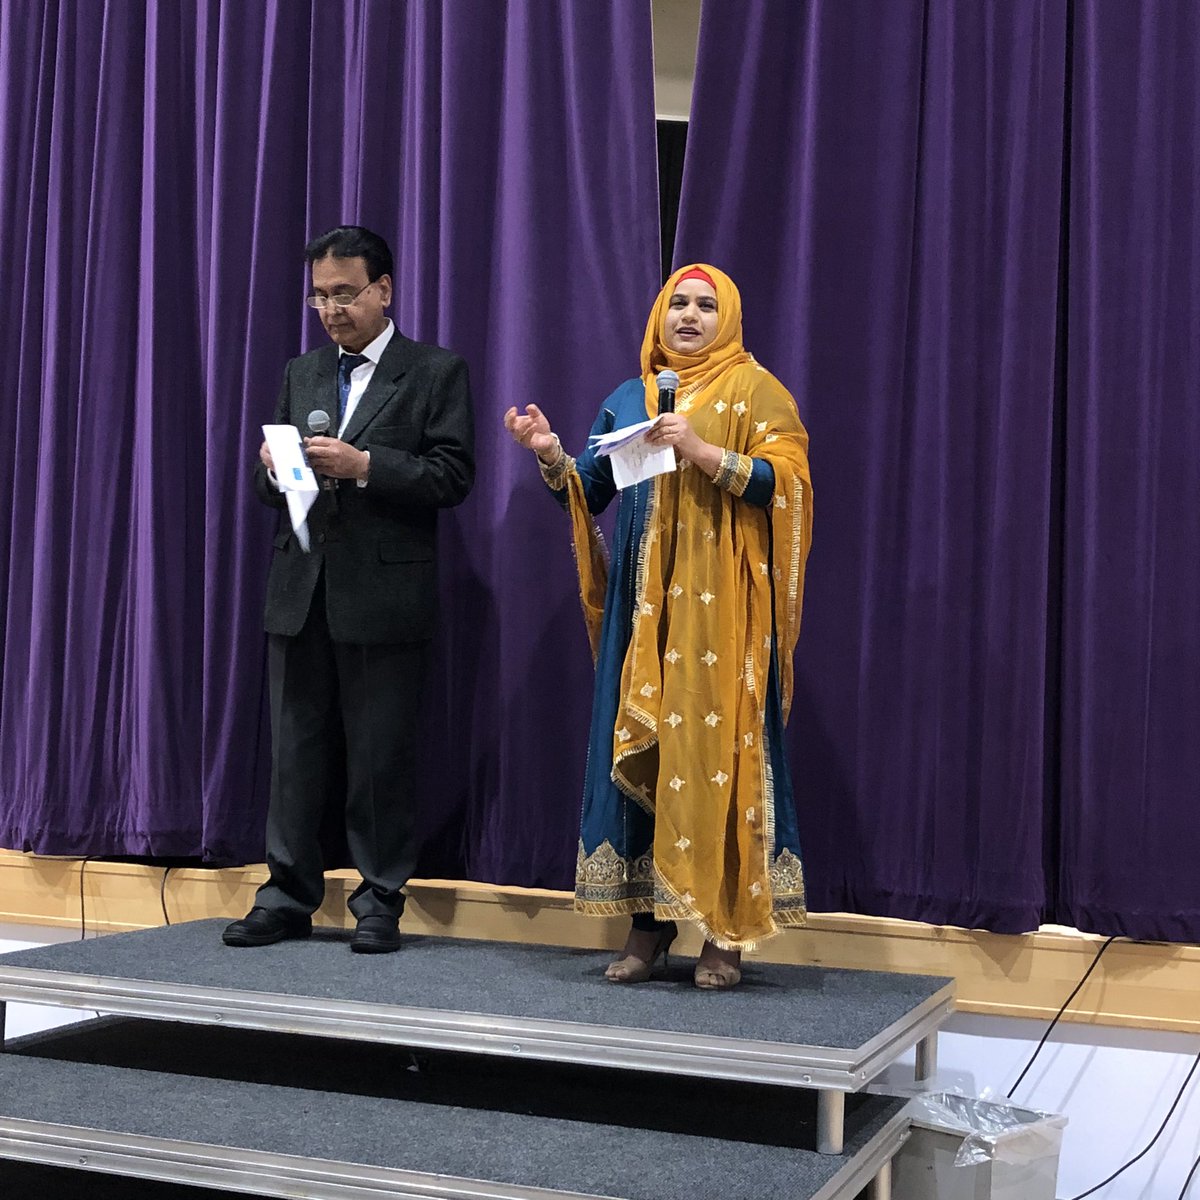 Anticipation rising @HalifaxAcademy_ for @HalifaxOppTrust Qawwali event as part of @Calderdale @CultureDale2024. MCs include our wonderful trustee Ambreen, in full flow here!